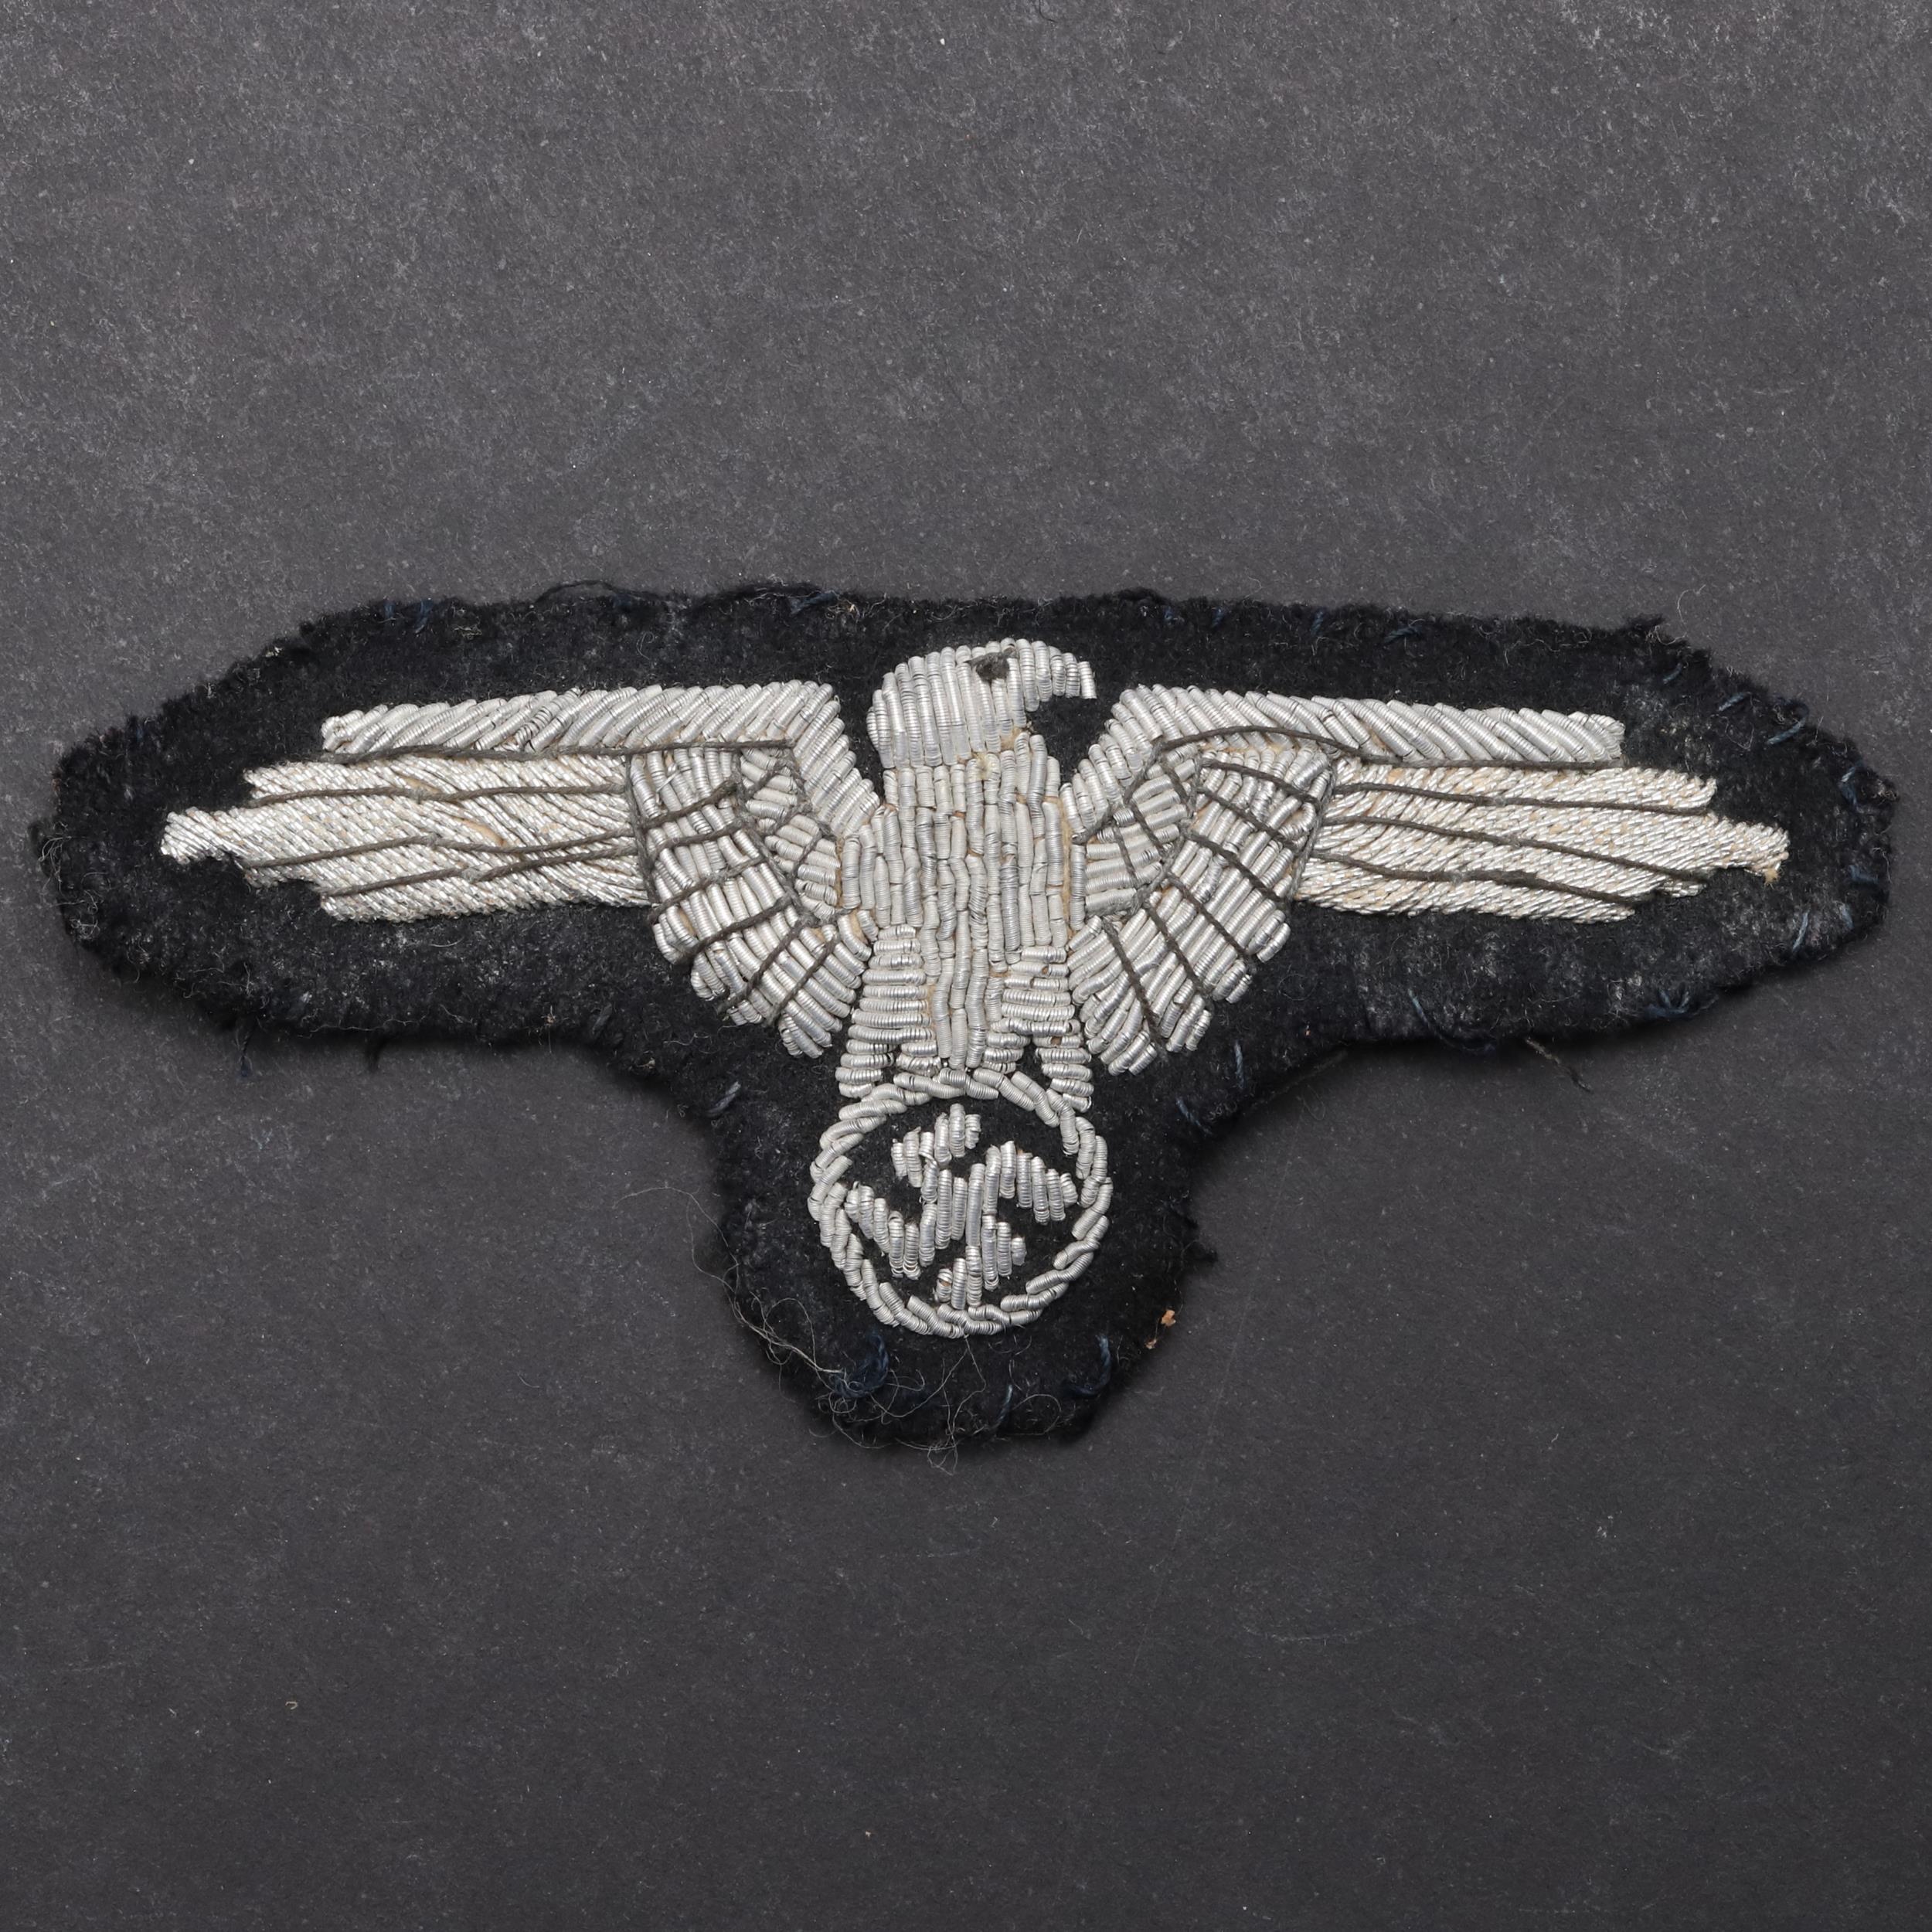 A SECOND WORLD WAR GERMAN WAFFEN SS OFFICER'S ARM EAGLE. - Image 2 of 3